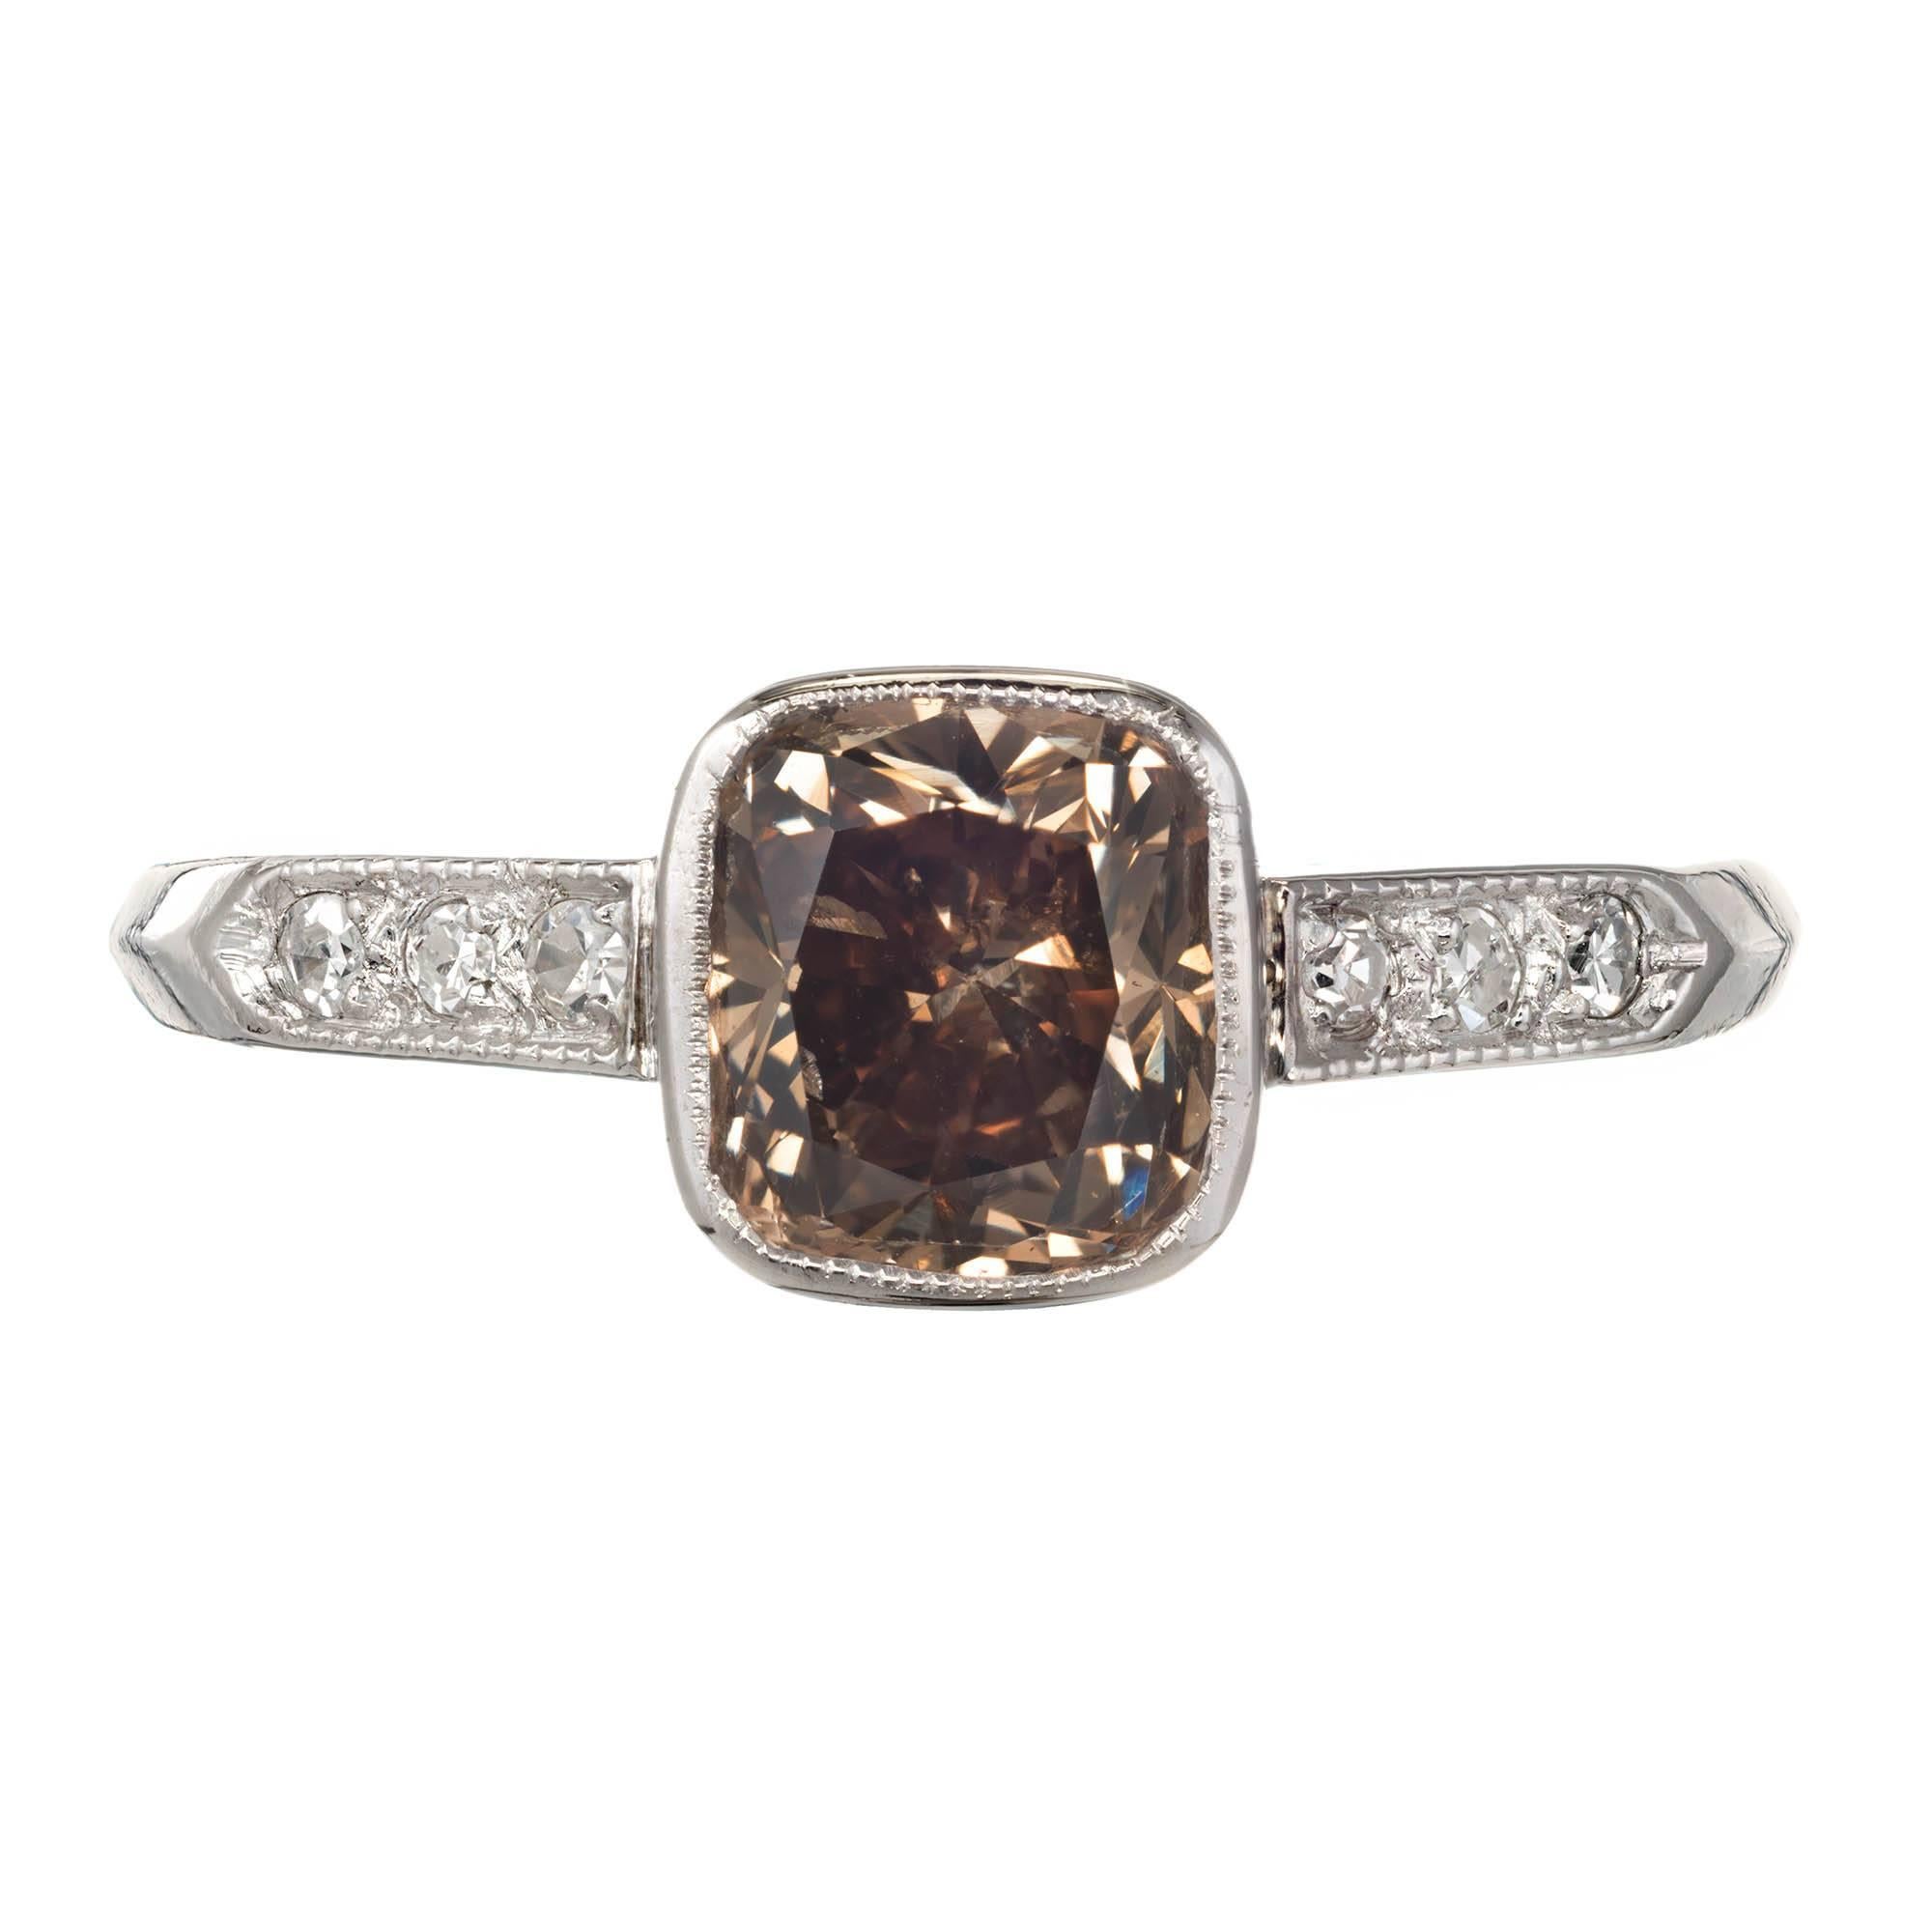 GIA certified natural color fancy brown diamond engagement ring. Antique cushion shape in an original 1930s Art Deco Platinum setting with 6 accent diamonds. GIA certificate #514157575564.

1 Antique cushion cut natural fancy color yellow brown